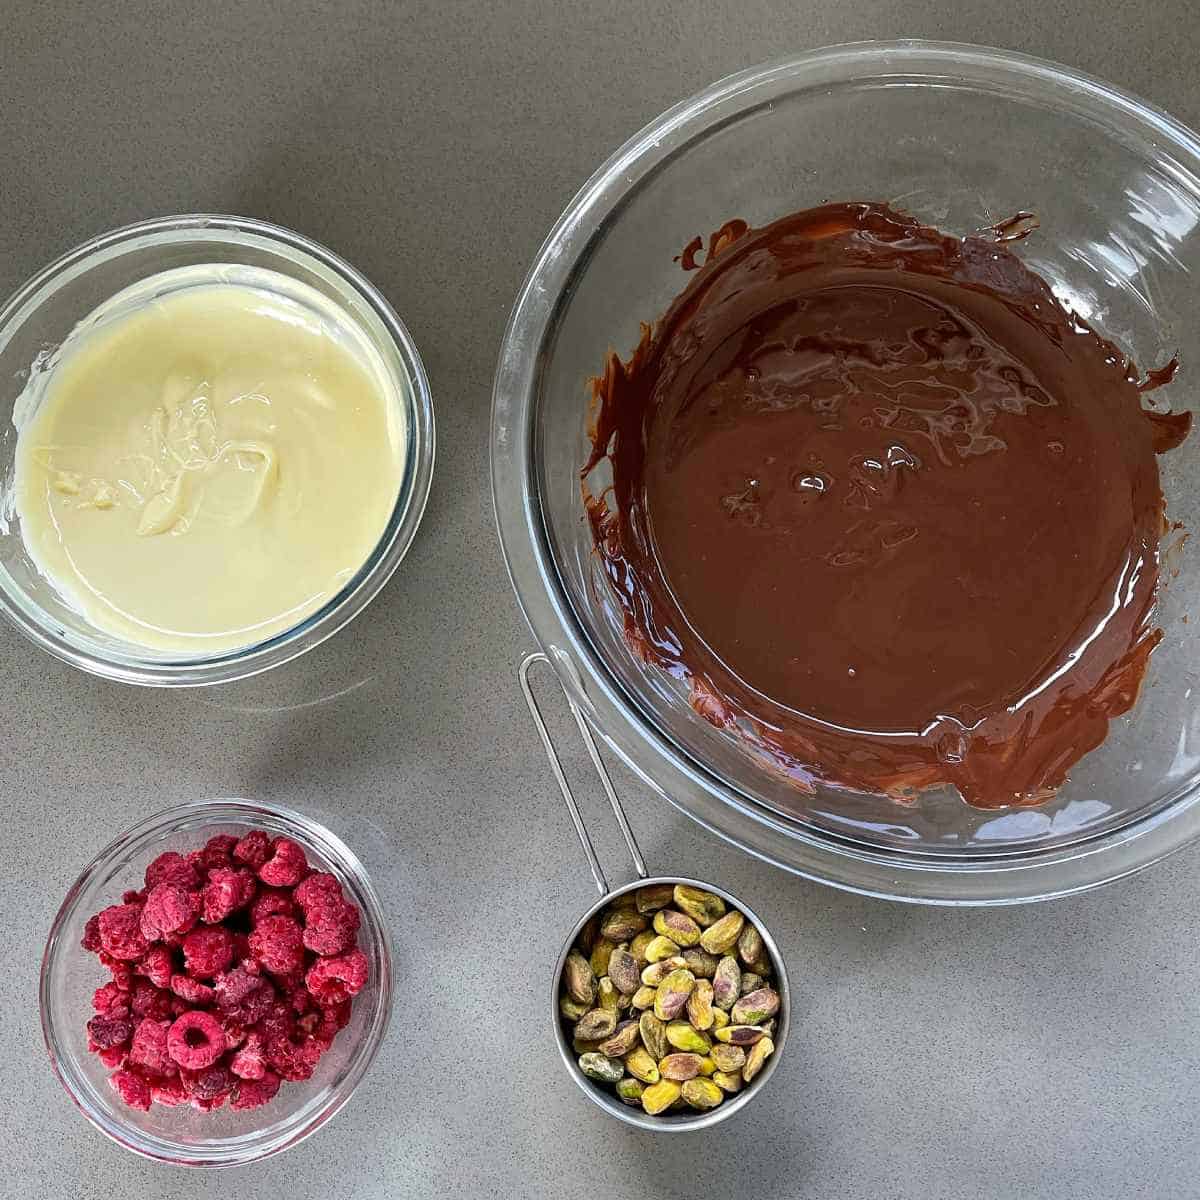 The melted milk and white chocolate and measured out raspberries and pistachios on a grey bench top for the chocolate bark.